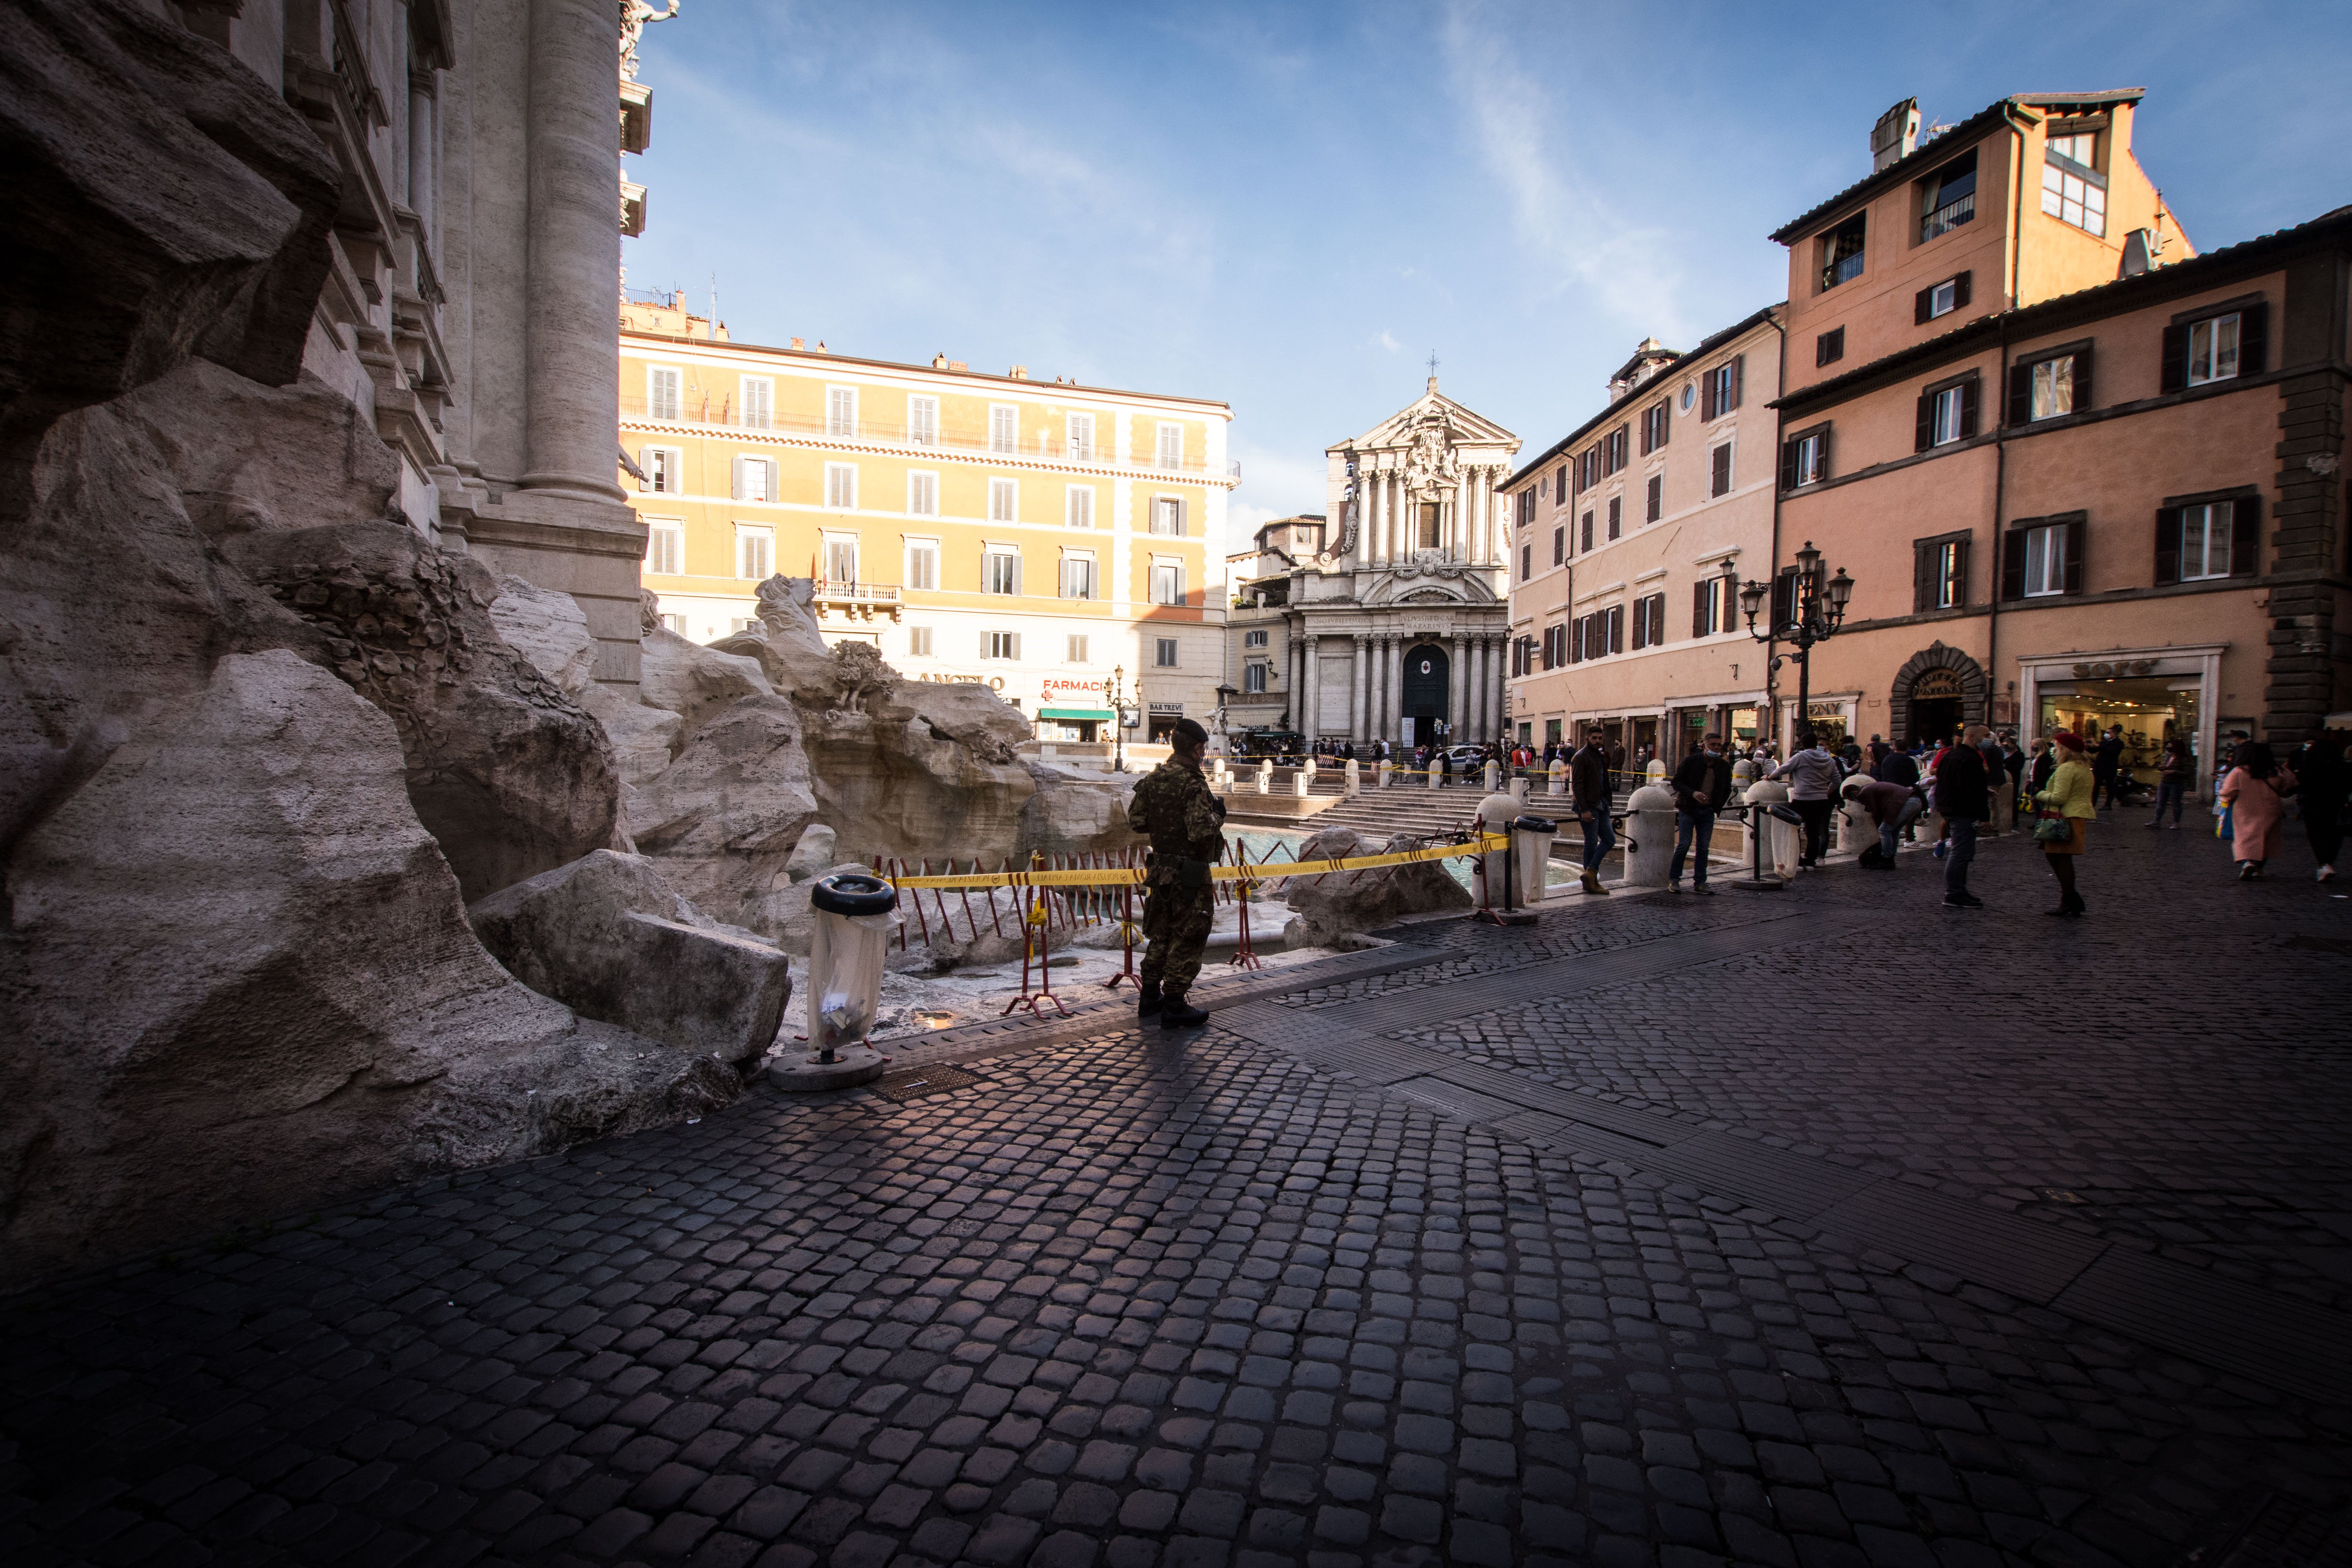 Daily Life Amid Covid-19 Pandemic In Rome